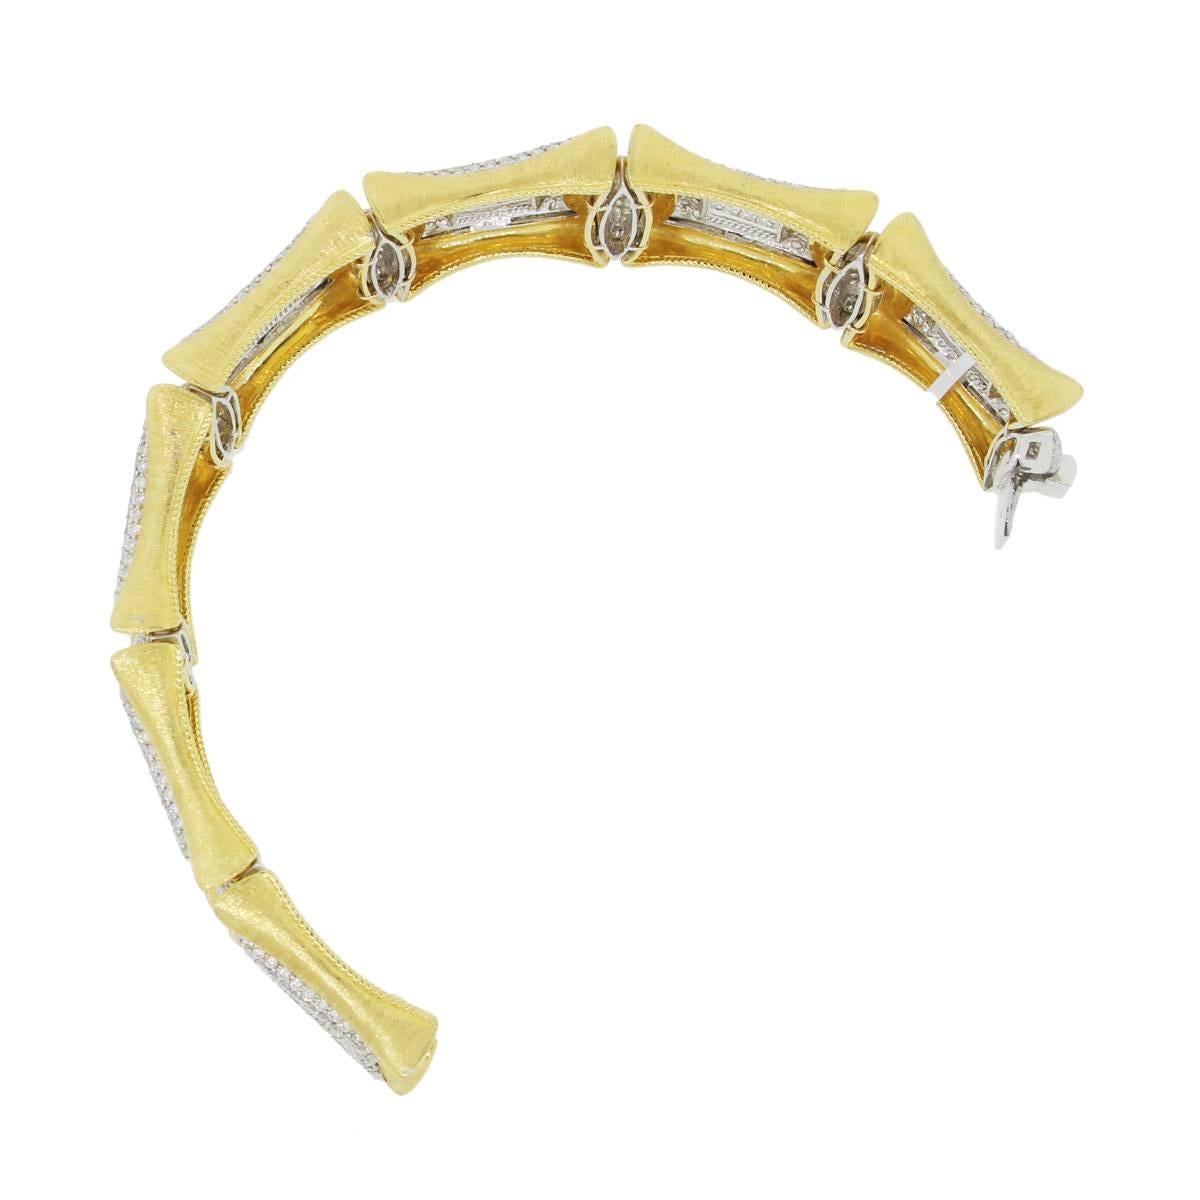 Material: 18k white and yellow gold
Diamond Details: Approximately 21.32ctw of round brilliant diamonds. Diamonds are G/H in color and VS in clarity
Bracelet Measurements: 8″ x 0.33″ x 1.25″
Clasp: Tongue in box with safety latch
Total Weight: